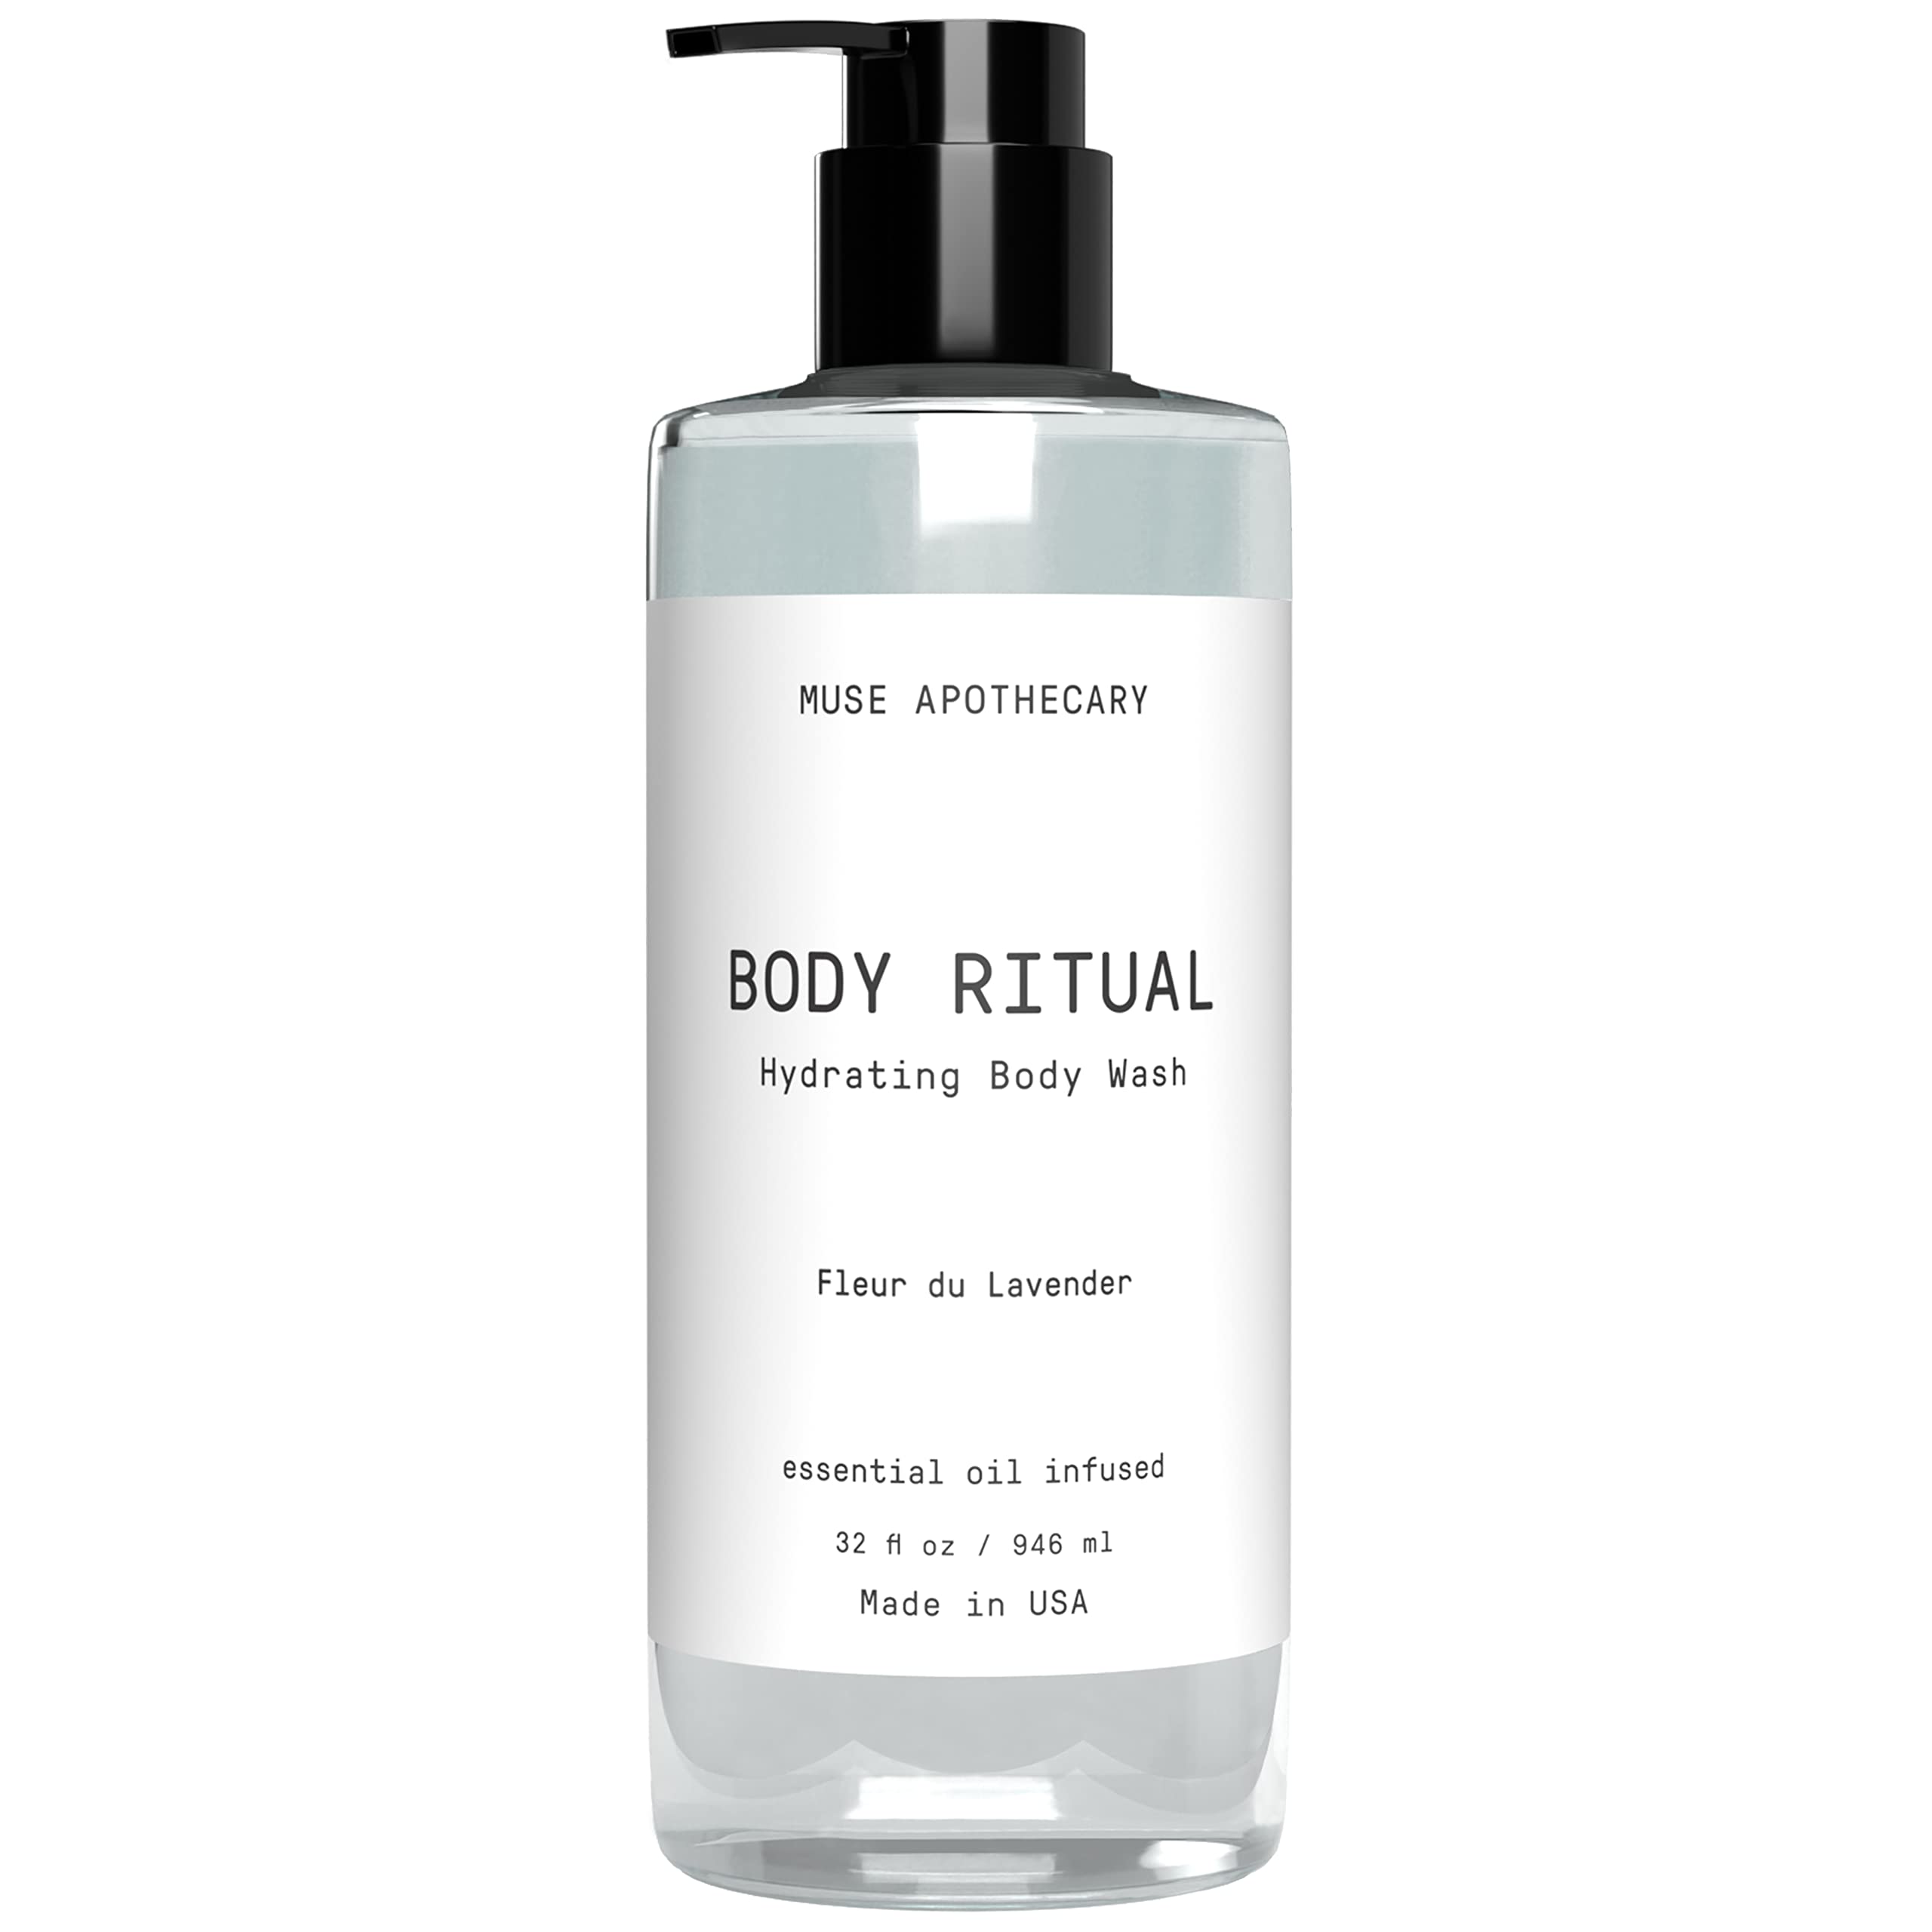 Muse Bath Apothecary Body Ritual Hydrating Body Wash - Fleur du Lavender  Body Wash for Women & Men - Essential Oil Infused Aromatherapy Body Wash  Women - Natural Body Wash for Women 